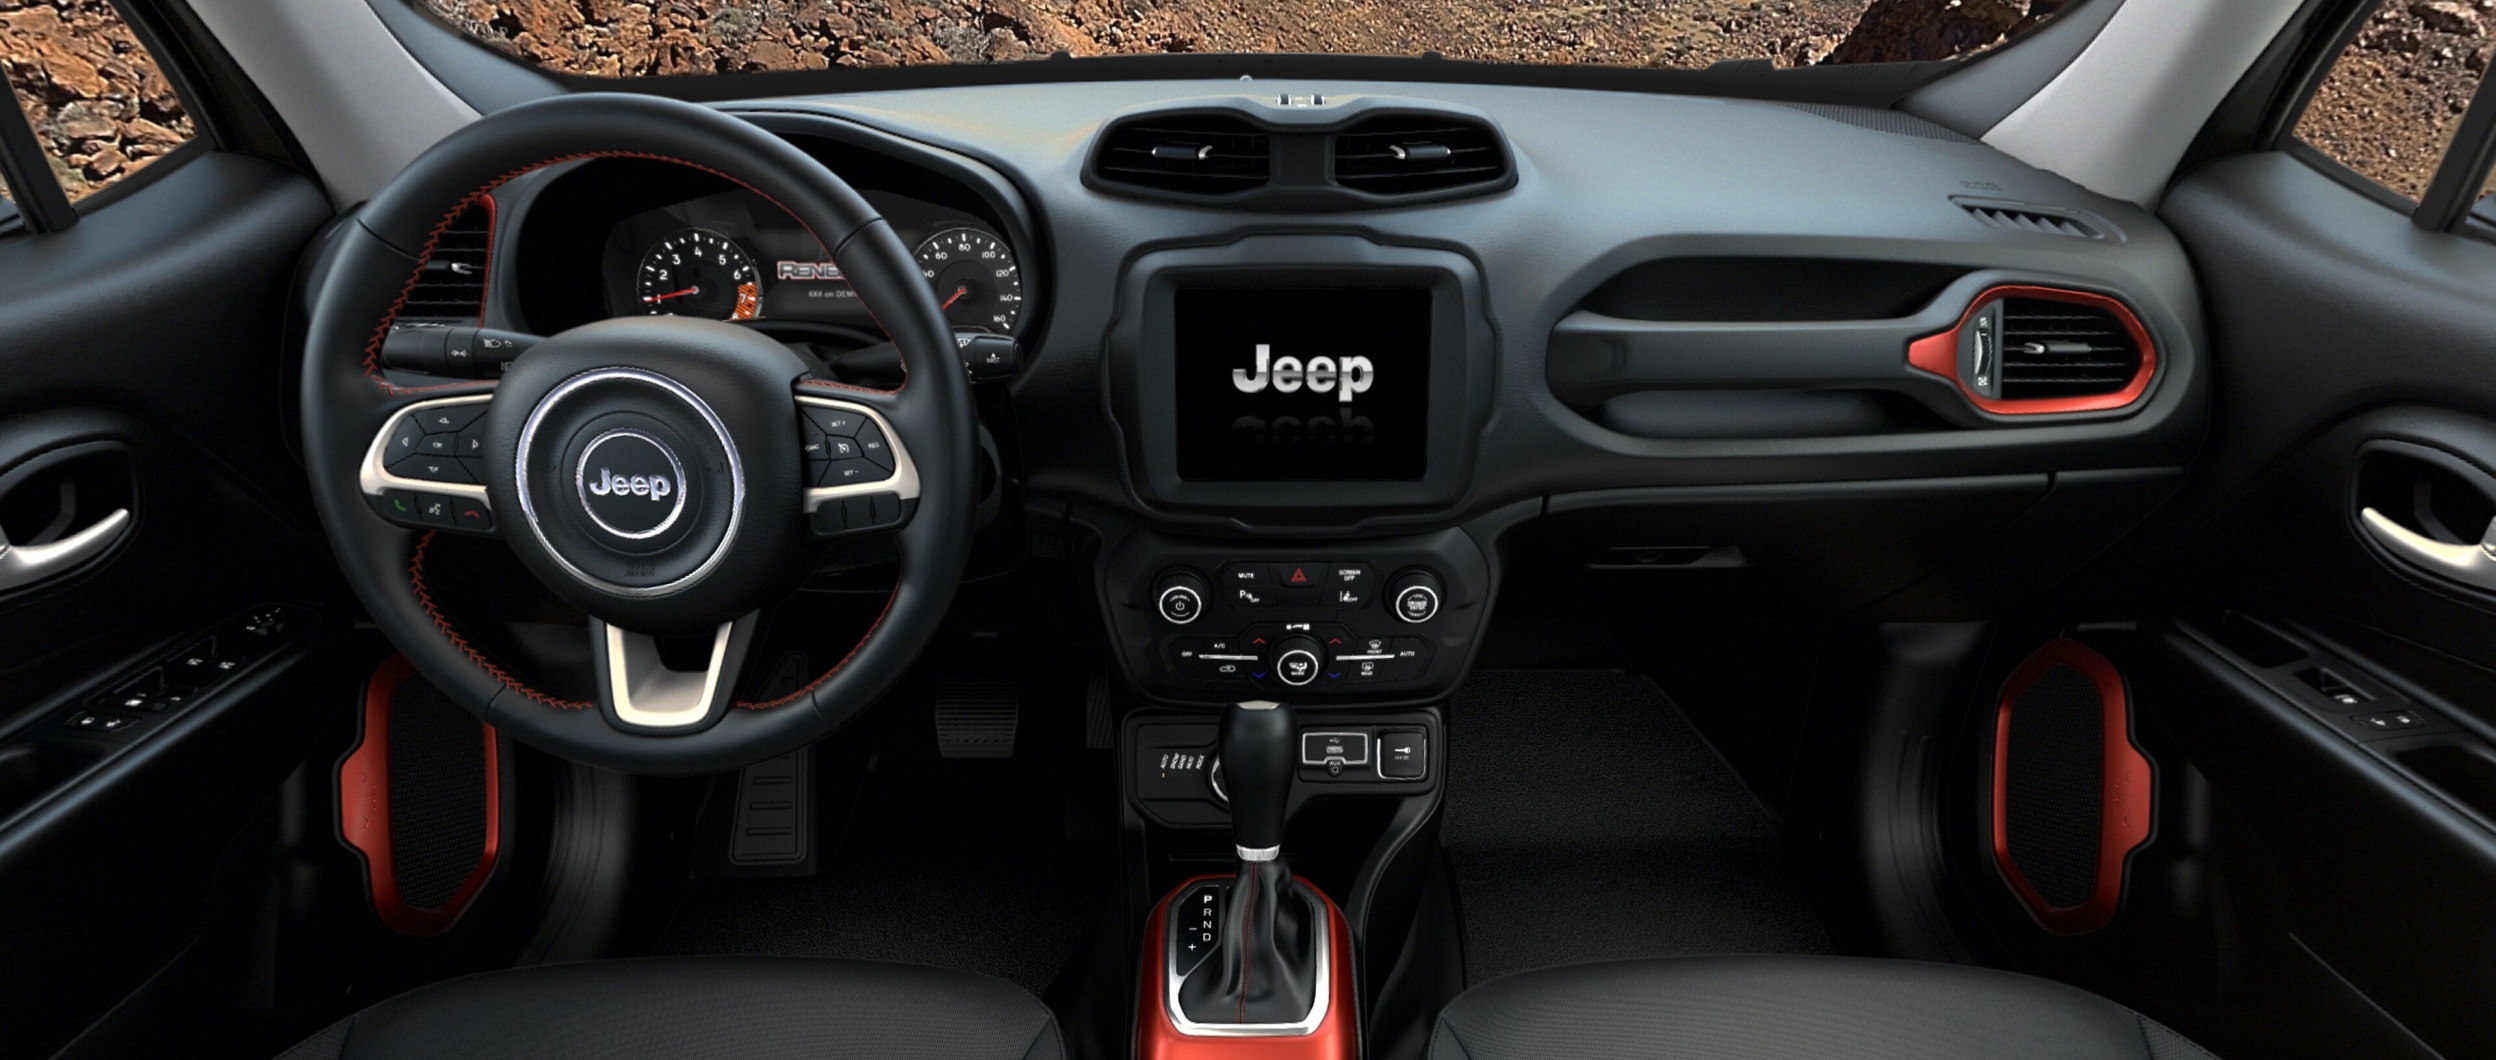 2021 Jeep Renegade Small SUV—Design Features